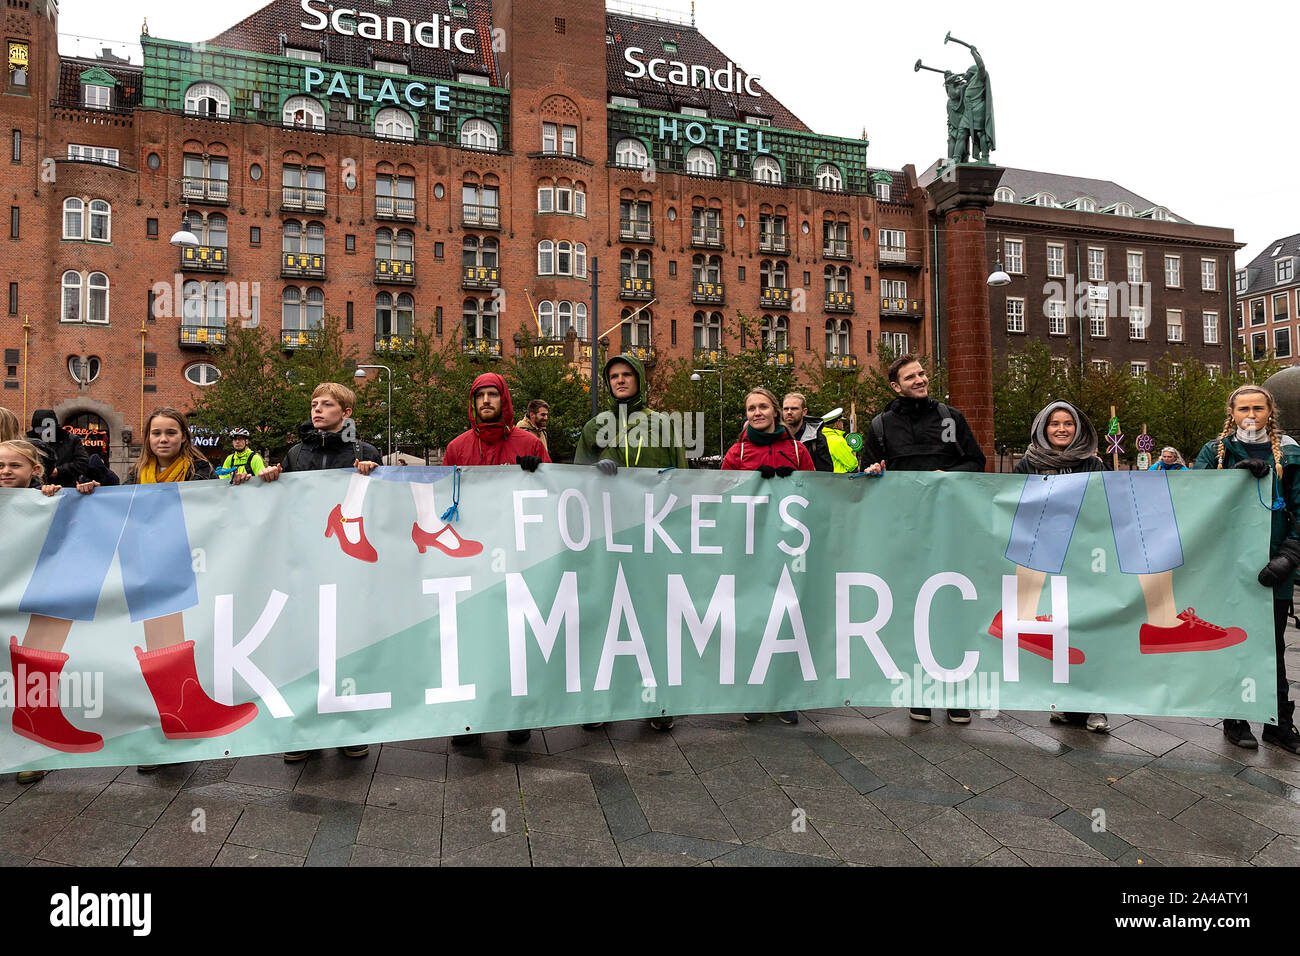 COPENHAGEN, DENMARK – OCTOBER 11, 2019:  Thousands of people gather at a People’s Climate March at Copenhagen City Hall Square and demanded swift and extensive climate action, which marks the conclusion of the C40 World Mayors Summit during this week in Copenhagen.  Alexandria Ocasio-Cortez, a US politician and climate activist, spoke at the demonstration. More than 90 mayors of some of the world’s largest and most influential cities representing some 700 million people met in Copenhagen from October 9-12 for the C40 World Mayors Summit. The purpose with the summit in Copenhagen was to build a Stock Photo